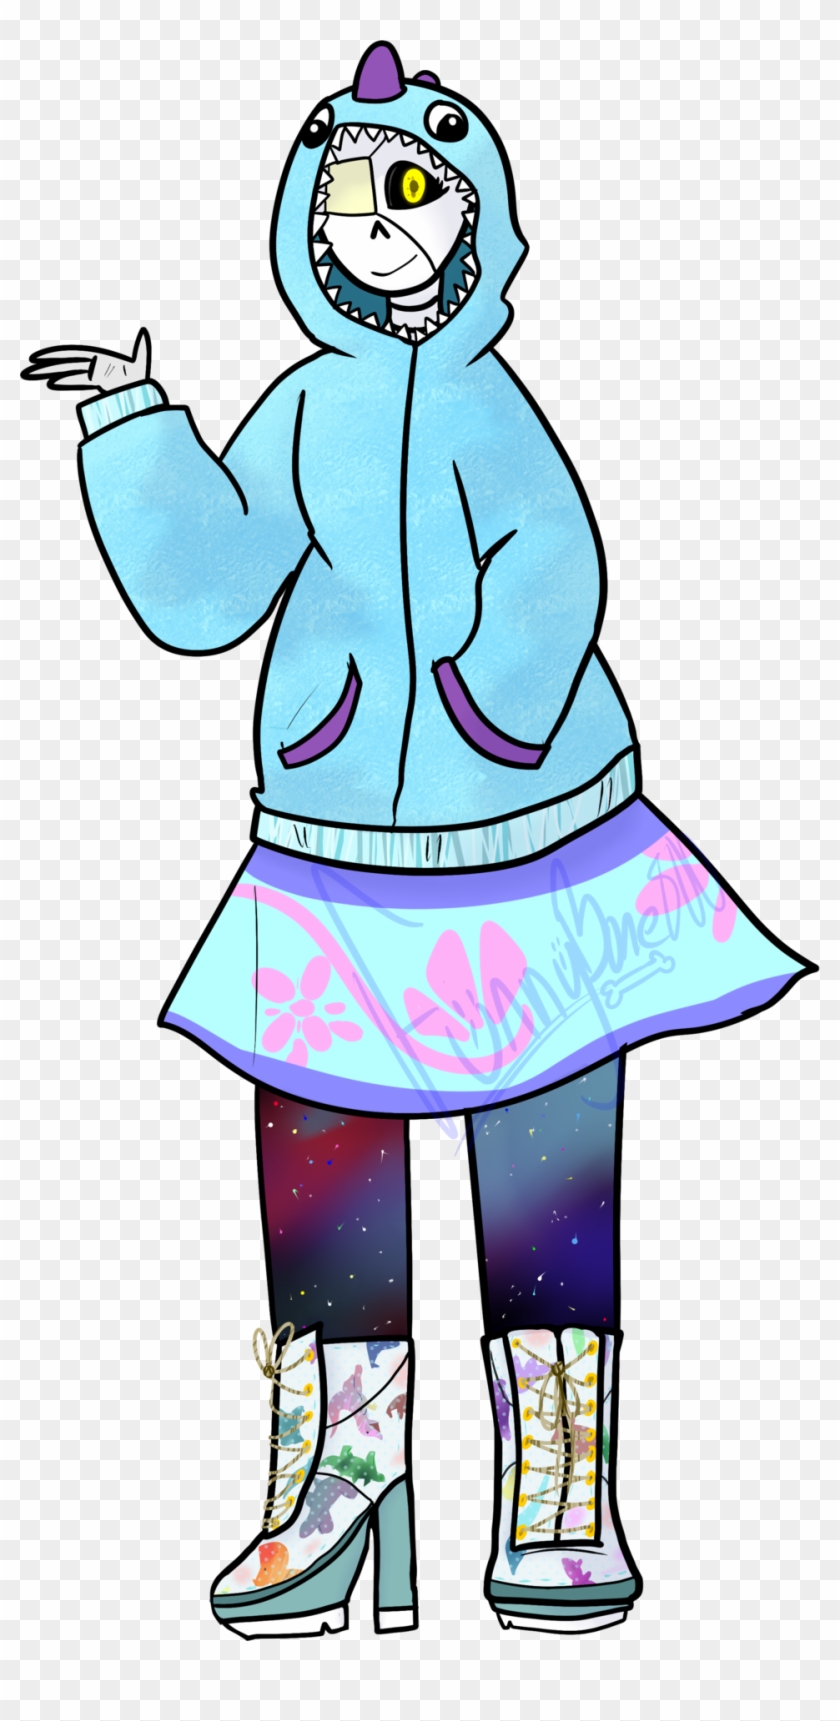 Villith Wanted Me To Draw Parsley In A Gay Ass Outfit - Villith Wanted Me To Draw Parsley In A Gay Ass Outfit #1298514